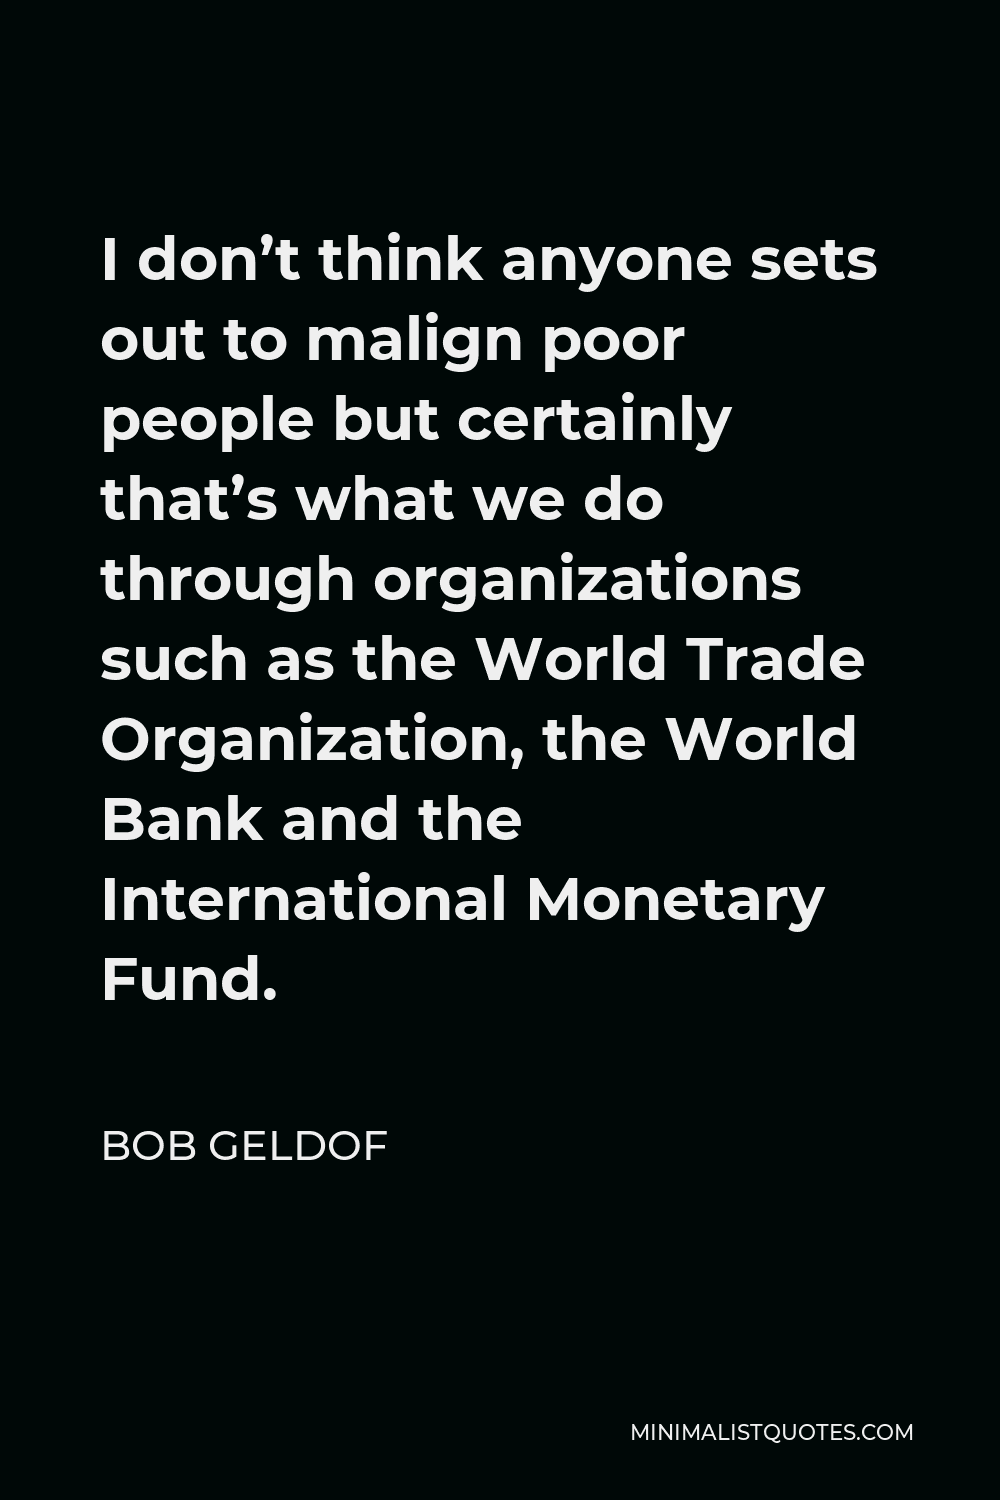 Bob Geldof Quote - I don’t think anyone sets out to malign poor people but certainly that’s what we do through organizations such as the World Trade Organization, the World Bank and the International Monetary Fund.